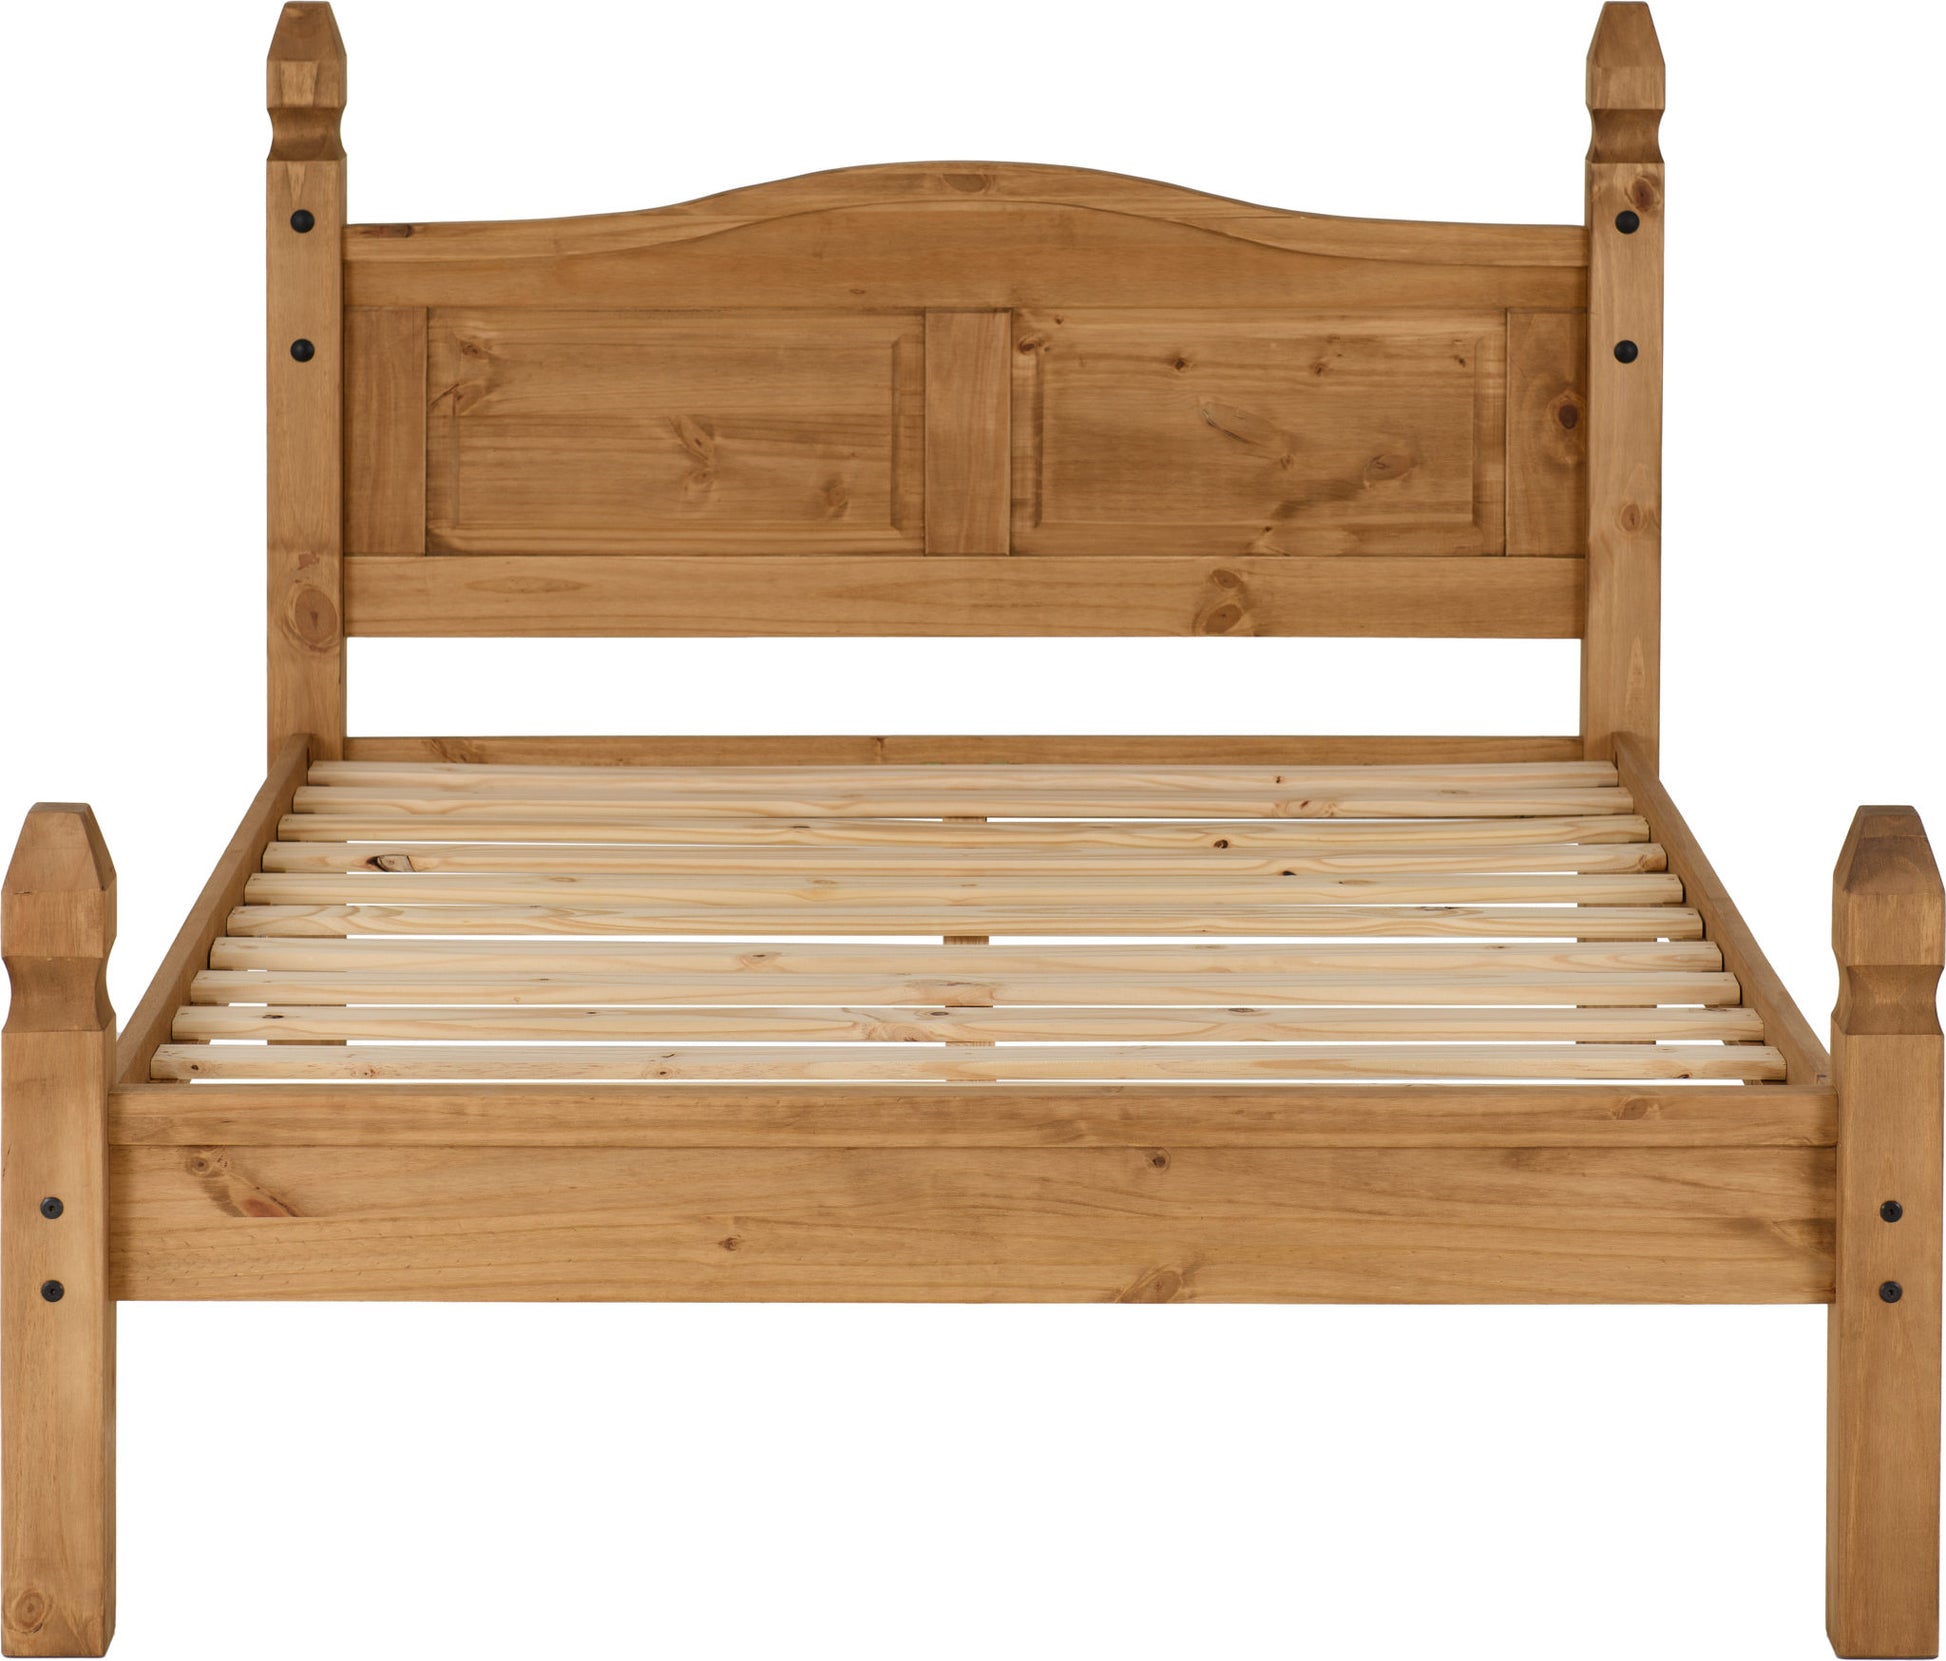 Corona 4'6" Bed Low Foot End - Distressed Waxed Pine